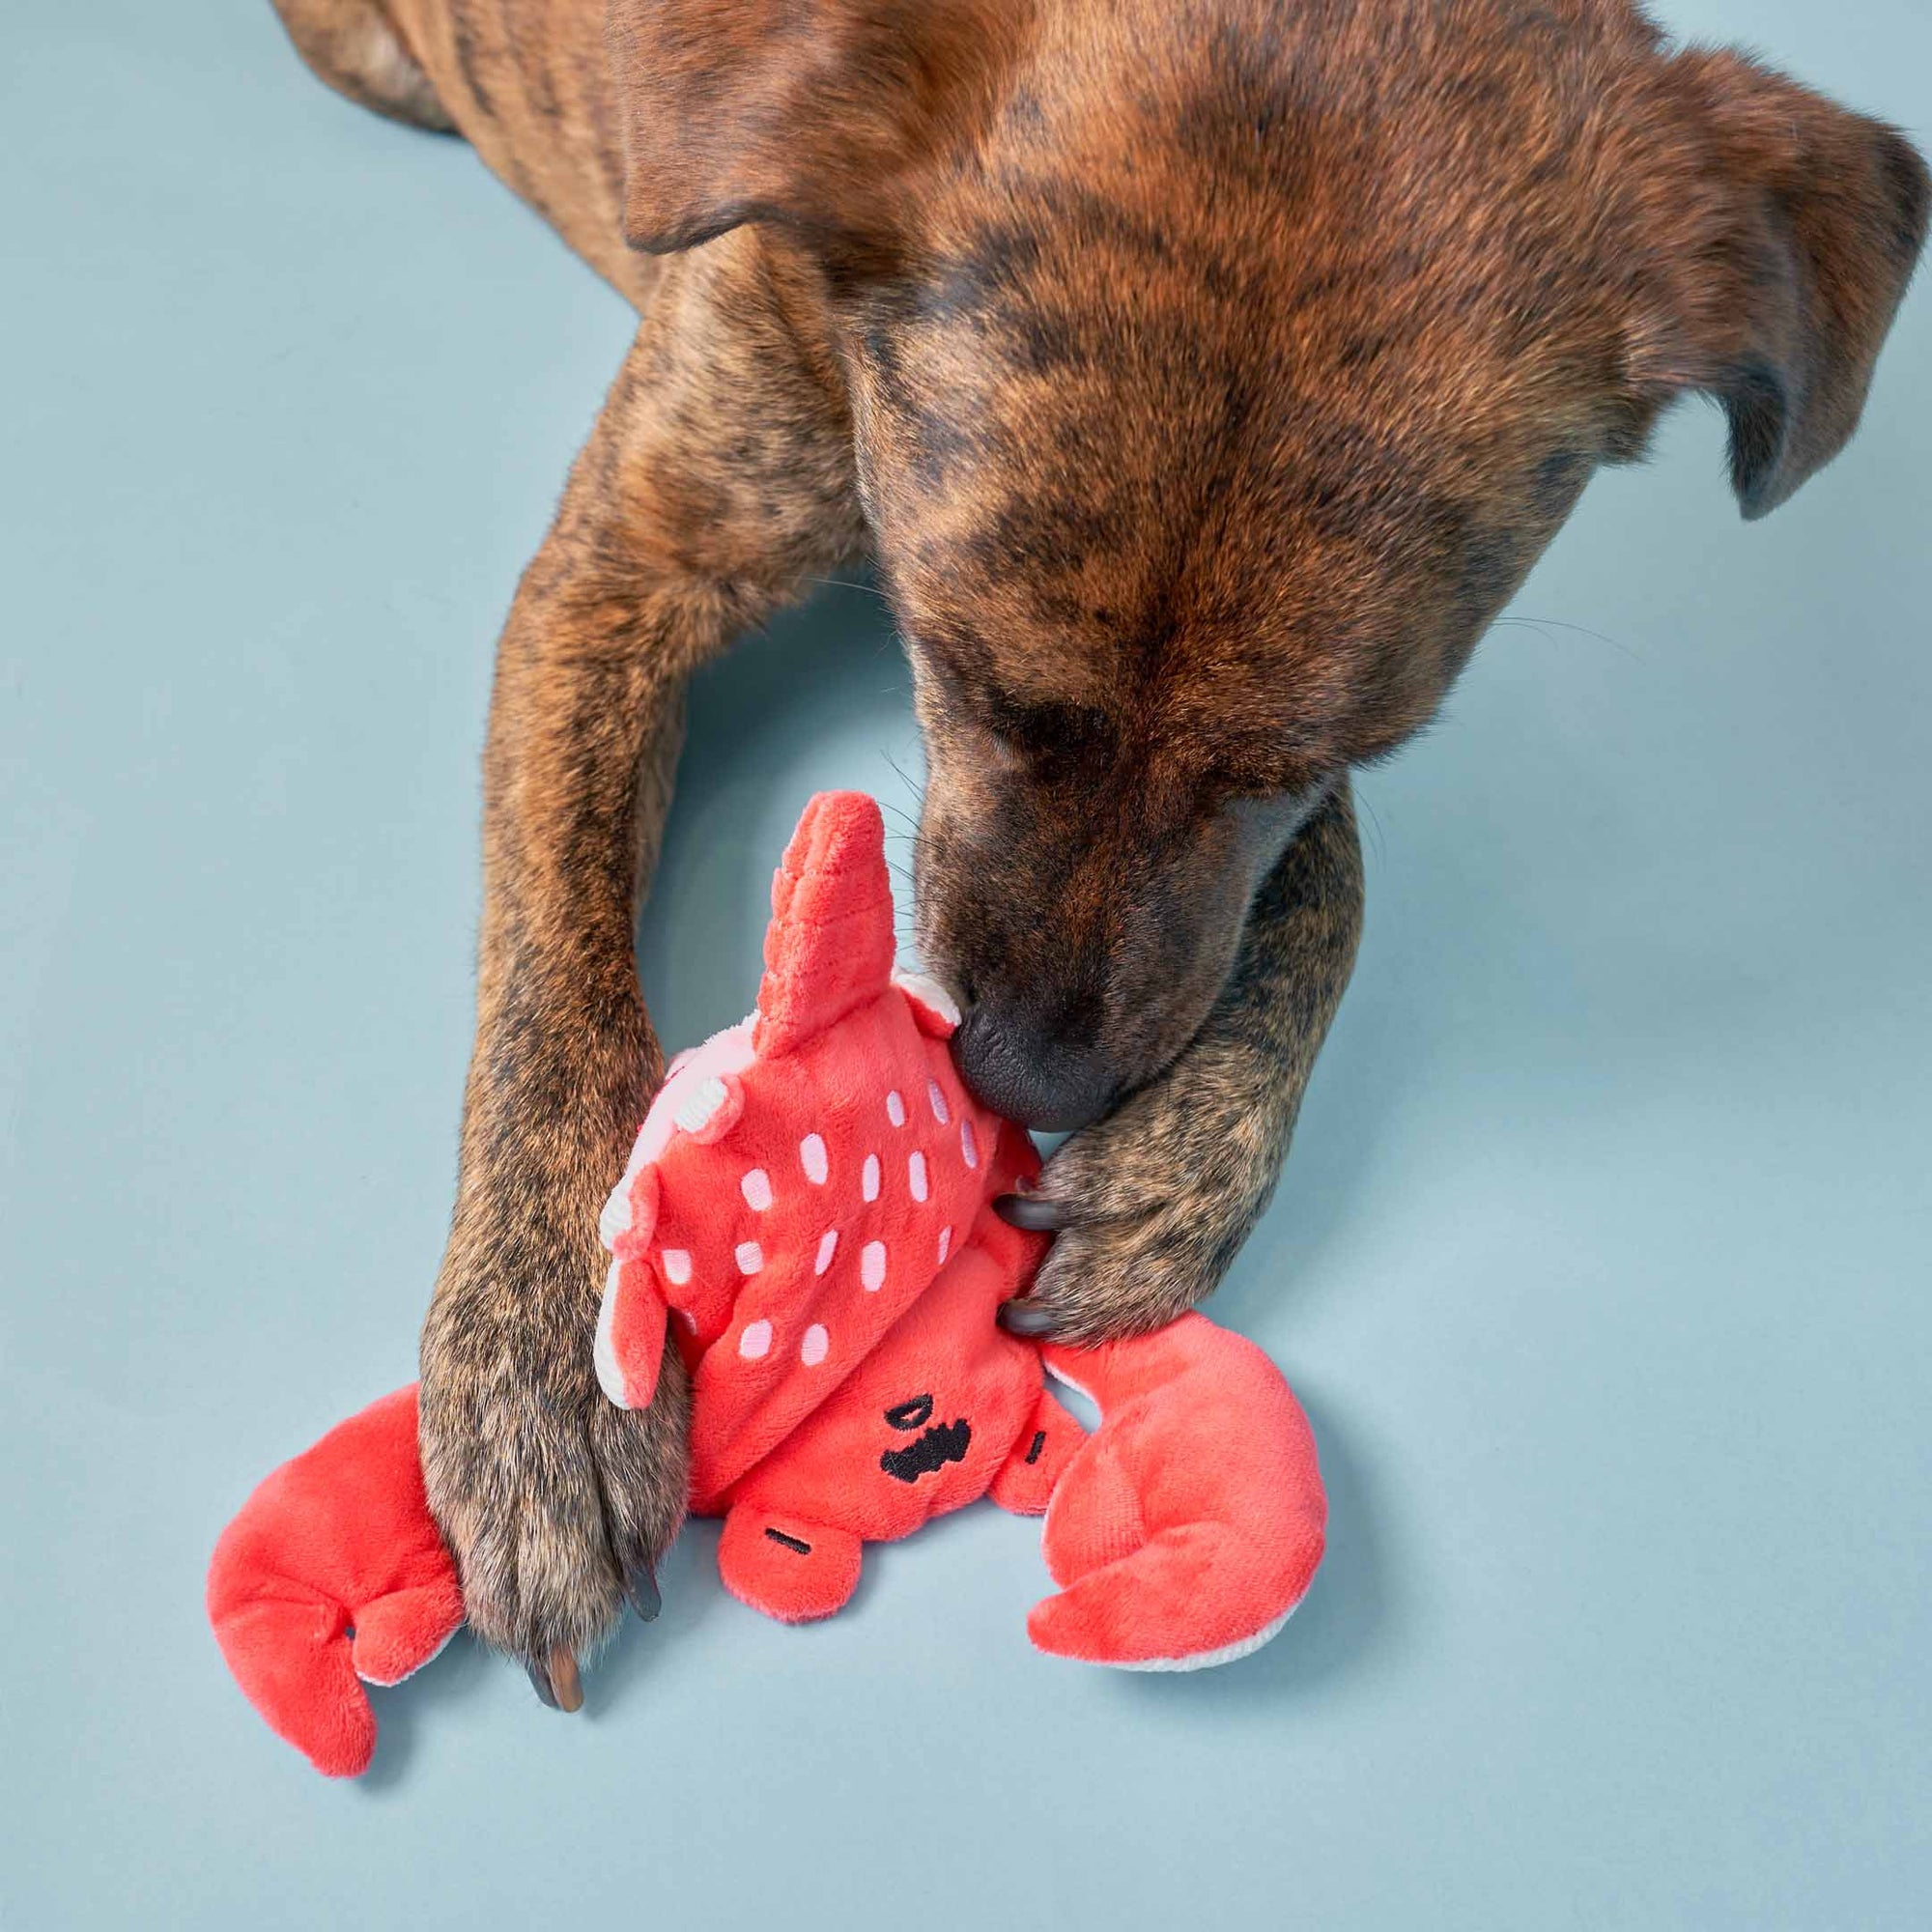 The image captures the brindle-coated dog lying down and engaging with the plush red crab toy. The dog seems to be in the middle of playing, as it uses both its paws and mouth to interact with the toy. This kind of play behavior is typical for dogs, combining the use of their limbs and teeth to explore and enjoy their toys. The blue background provides a calm and contrasting backdrop that accentuates the colors of the dog and the toy, highlighting the interaction.